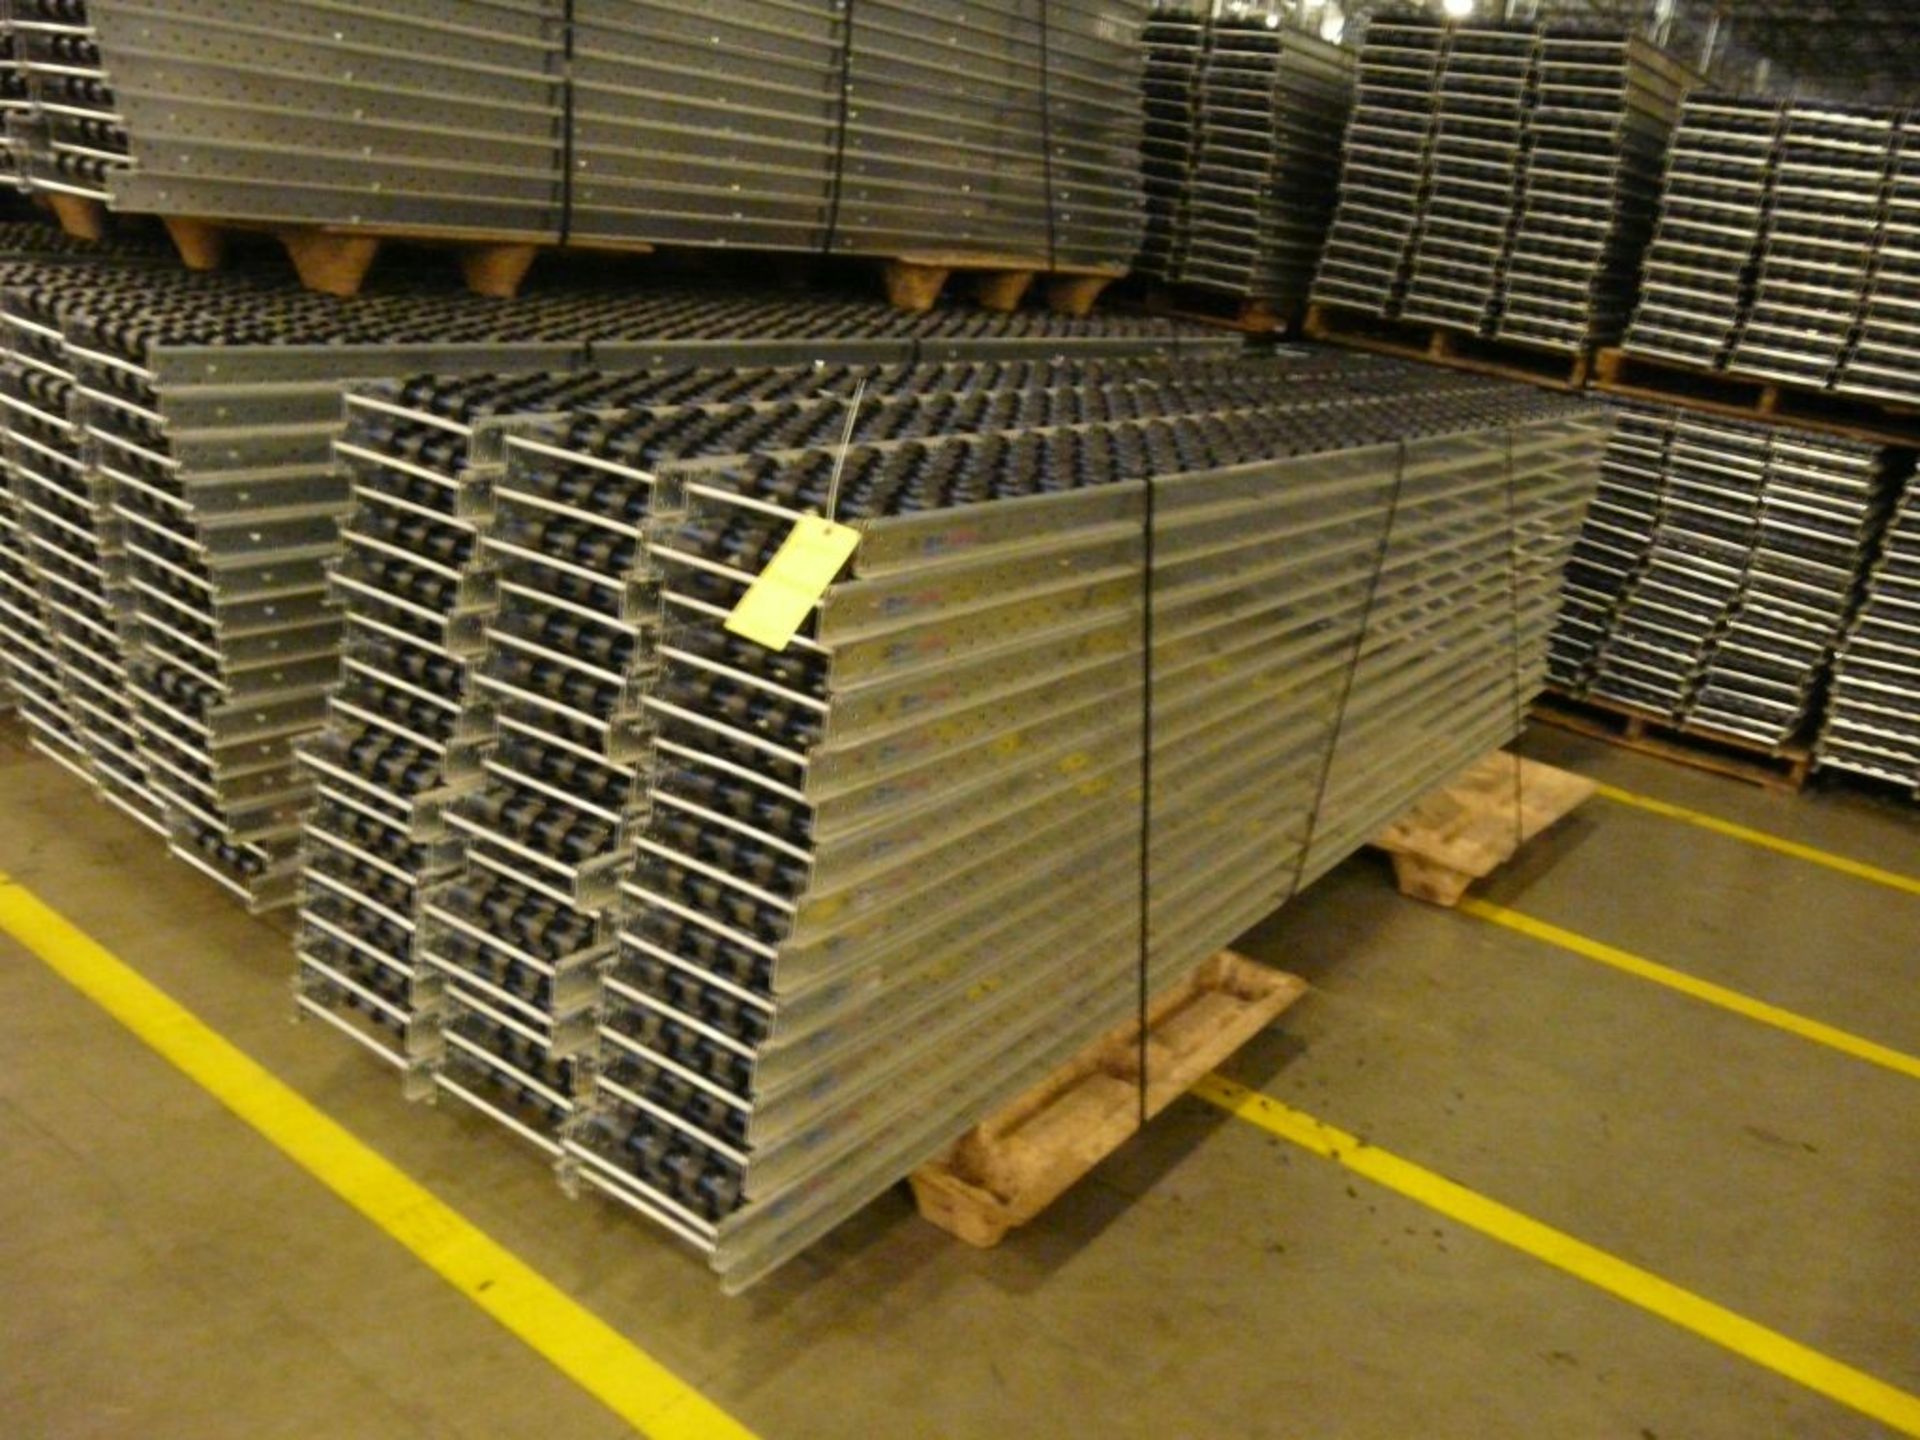 Lot of (90) SpanTrack Wheelbed Carton Flow Conveyors - 11.5'L x 11"W; Tag: 224223 - $30 Lot